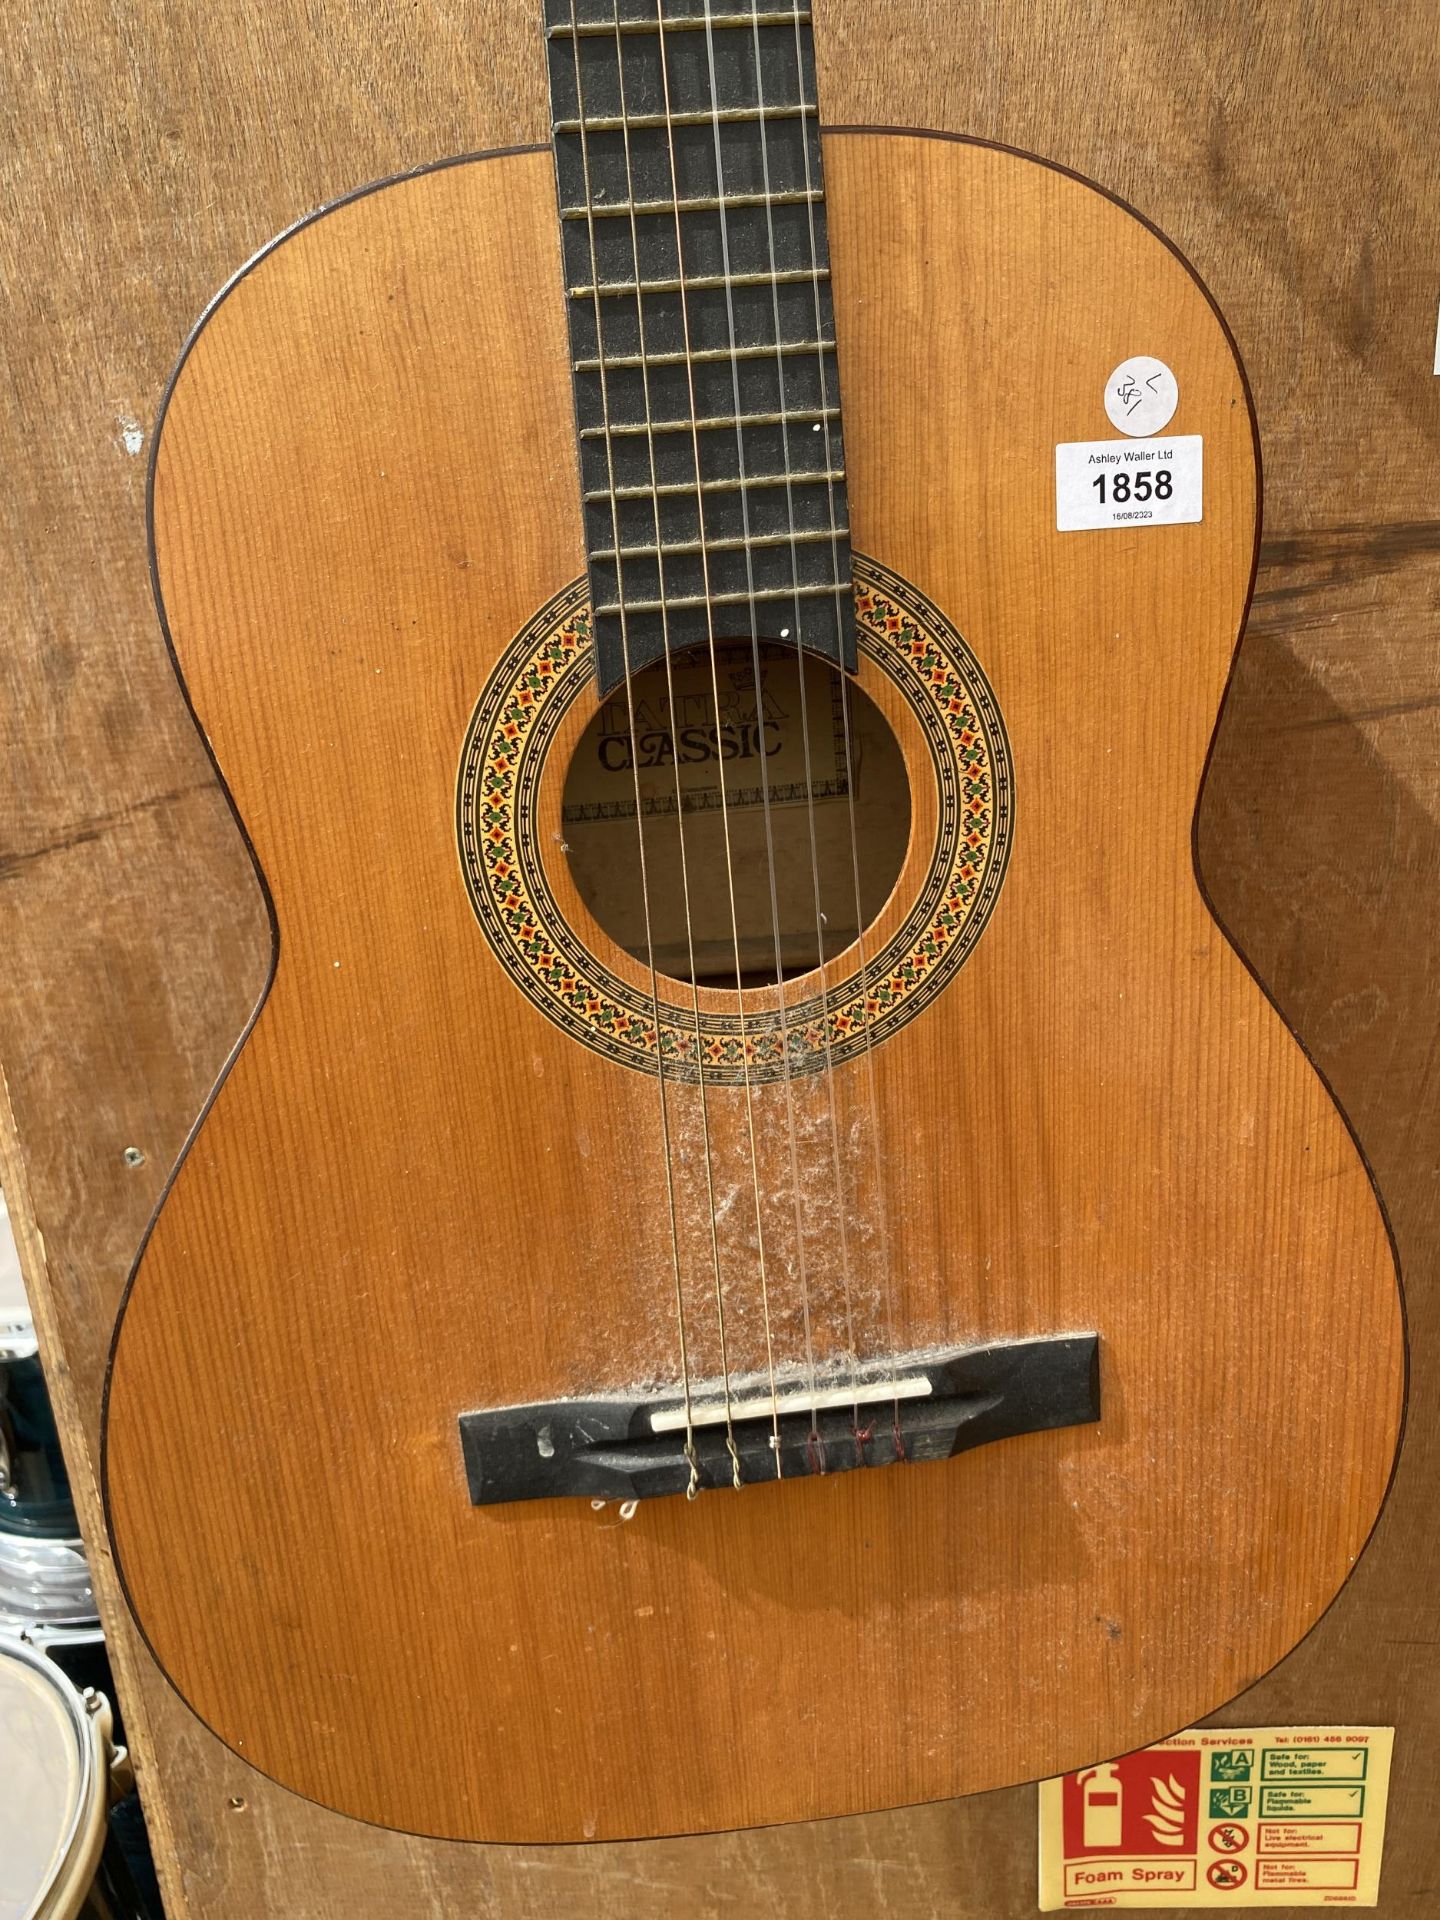 A VINTAGE TATRA CLASSIC ACOUSTIC GUITAR - Image 2 of 3